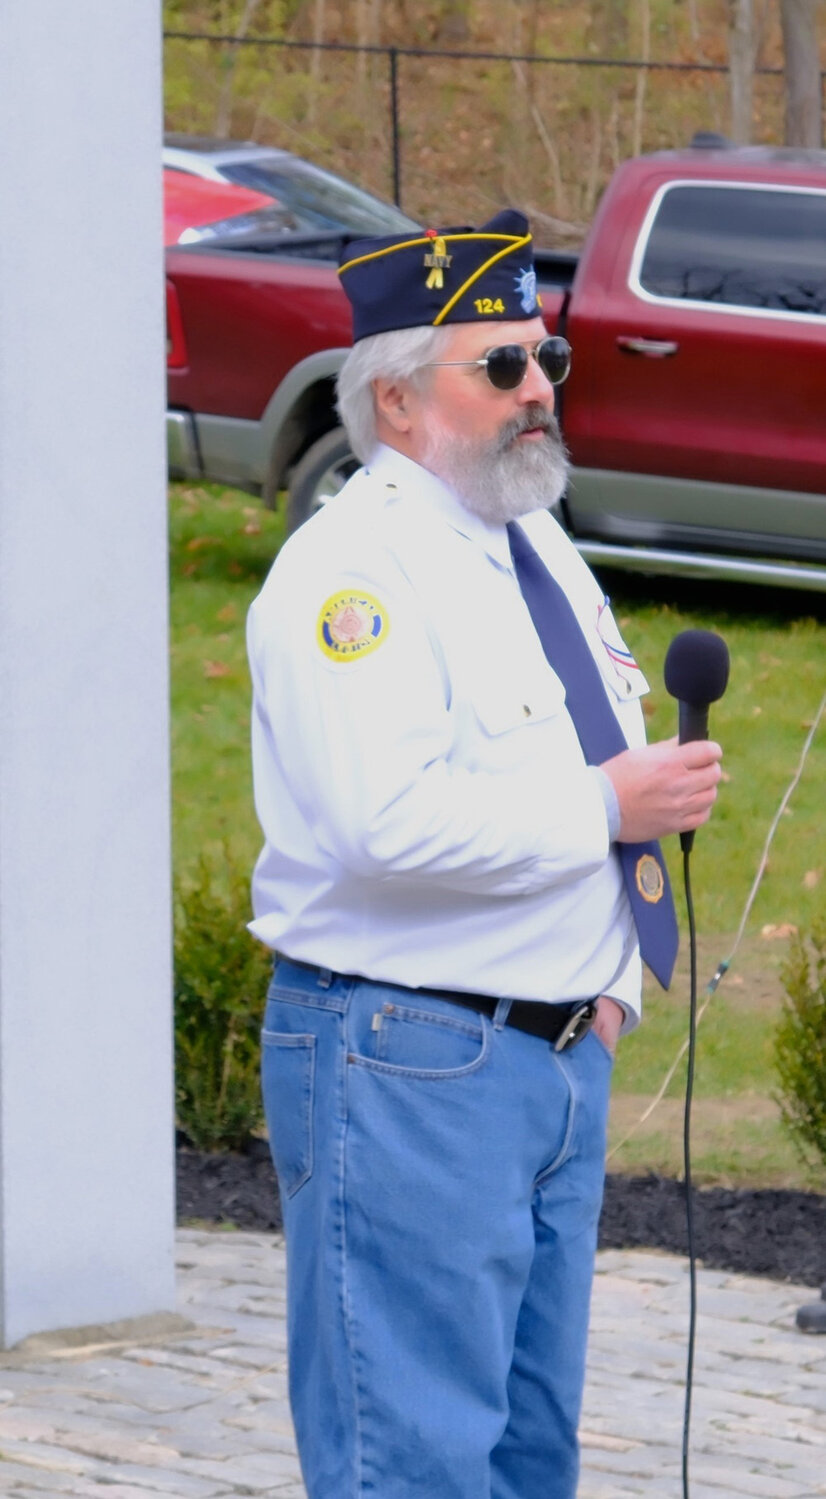 Ed Timberger, who is the new American Legion Commander in Marlborough, urged people to thank a Veteran when they see them in public. “They appreciate that and it is important to honor and support them for what they have done for our country. They are all heroes.”